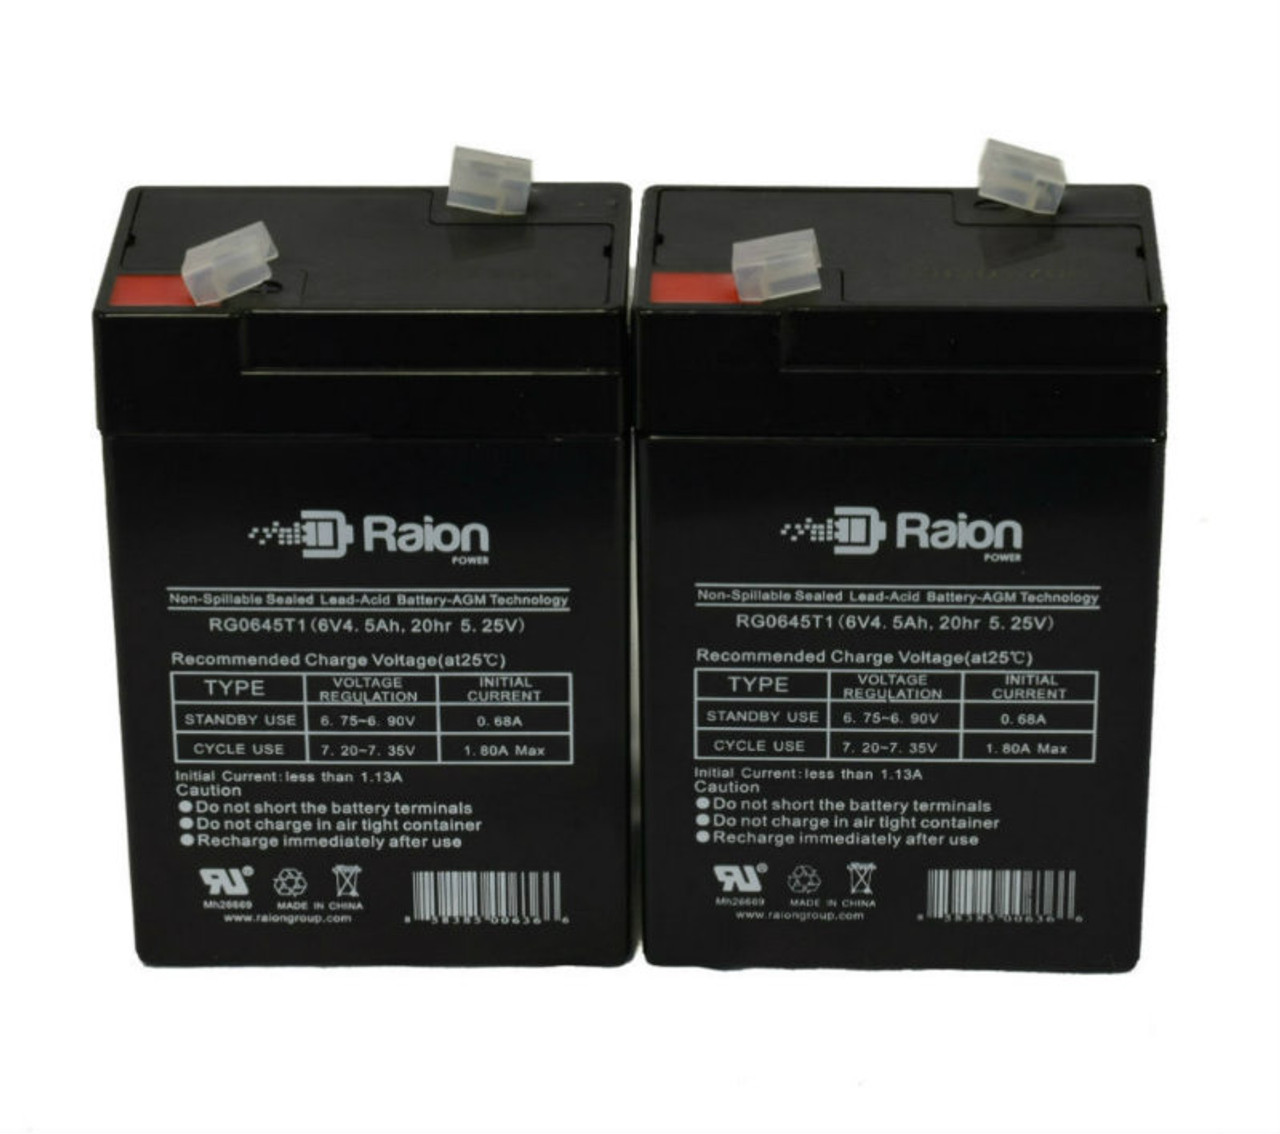 Raion Power 6V 4.5Ah Replacement Emergency Light Battery for Exitronix 640 - 2 Pack